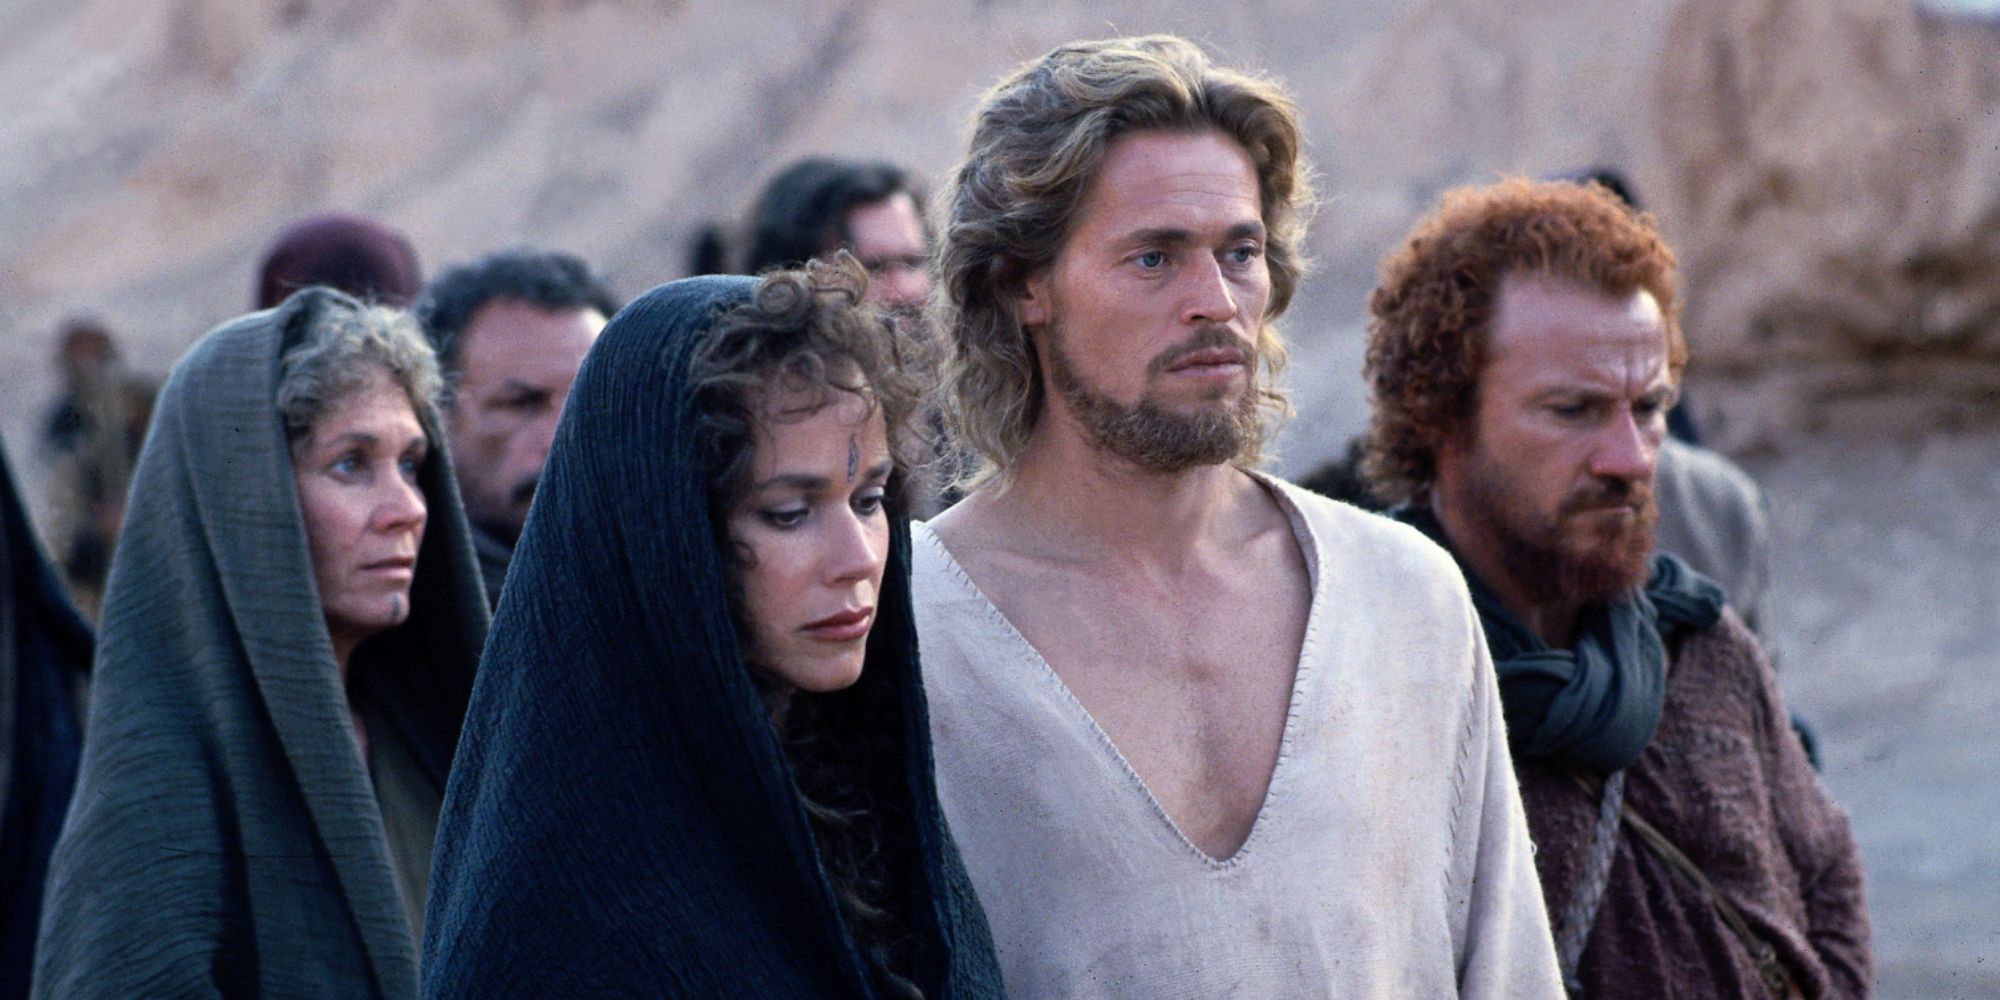 Barbara Hershey, Willem Dafoe, and Harvey Keitel as Mary Magdalene, Jesus Christ, and Judas Iscariot among a group of pilgrims in The Last Temptation of Christ